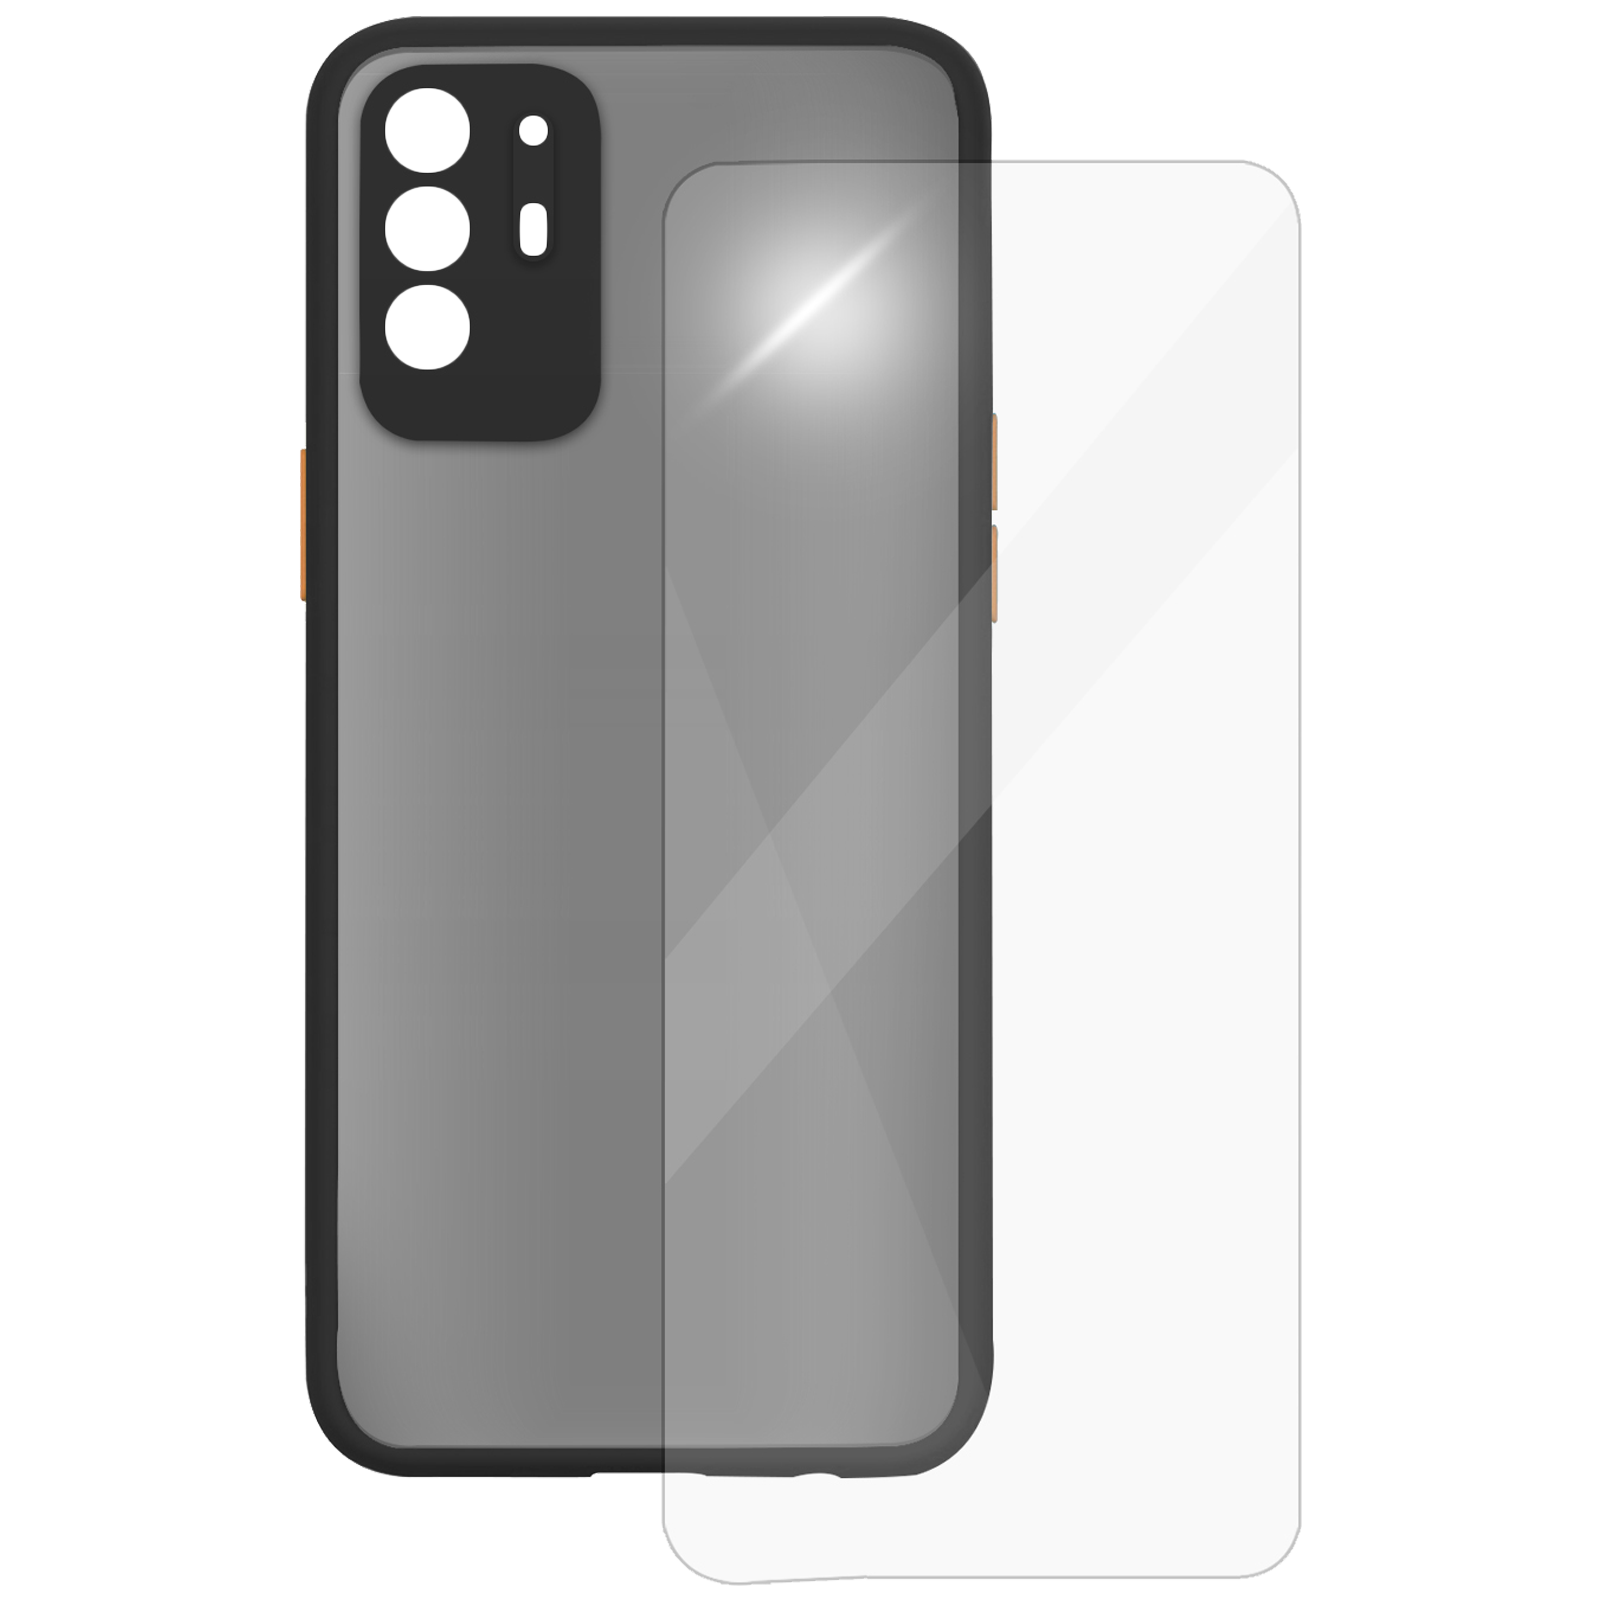 Arrow Camera Duplex Back Case and Screen Protector Bundle For Oppo F19 Pro+ (Ultra Transparent Visibility, AR-988, Black)_1